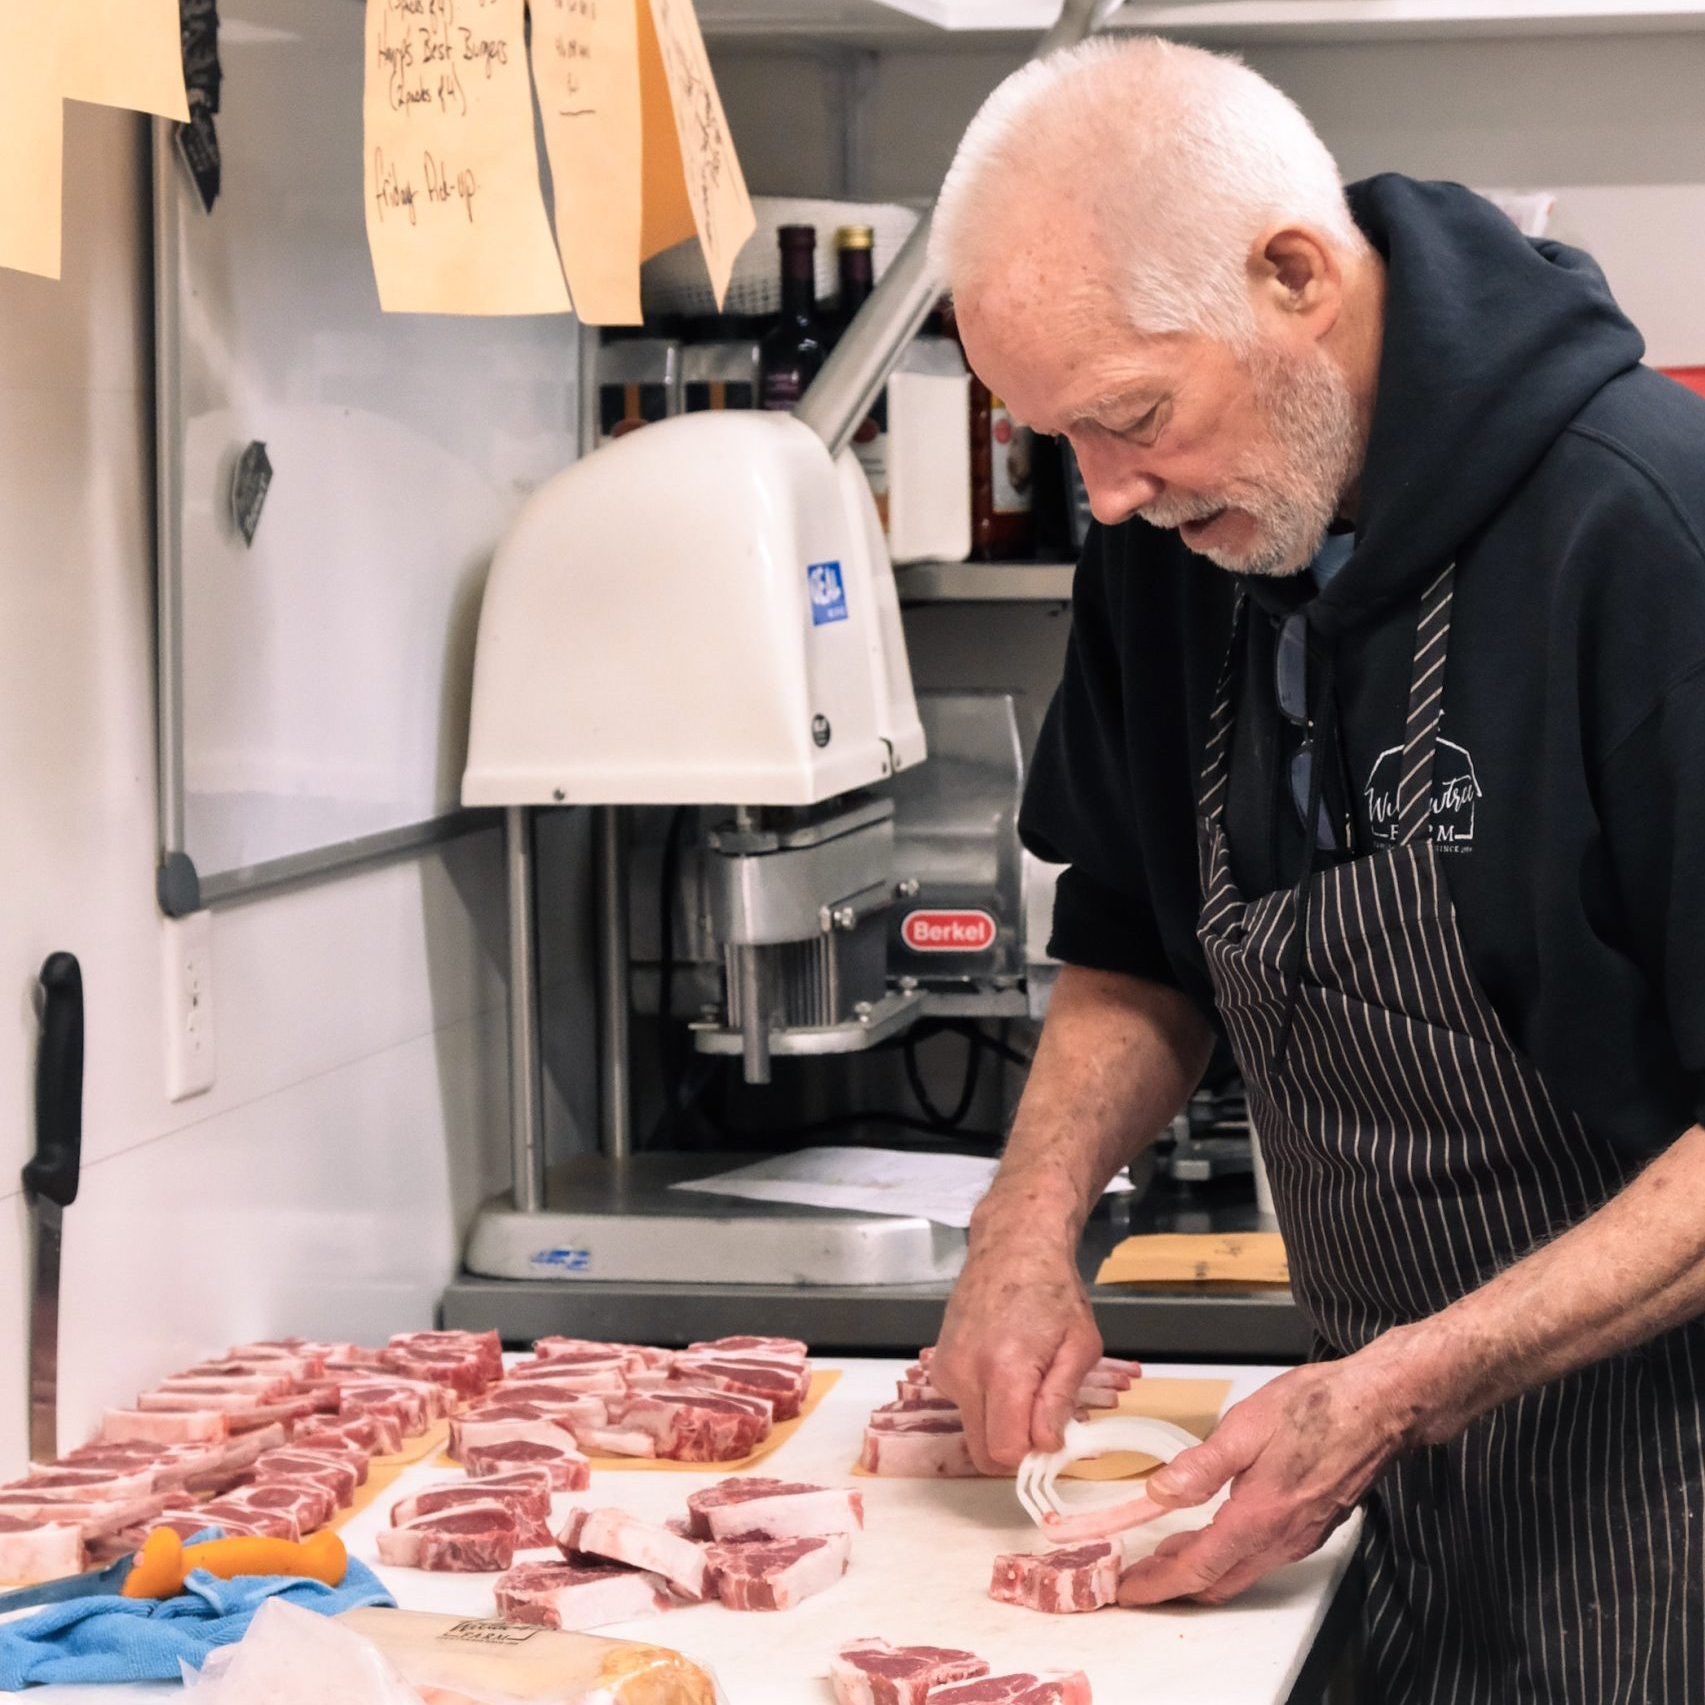 Hand-butchering locally raised meat at Willowtree Farm